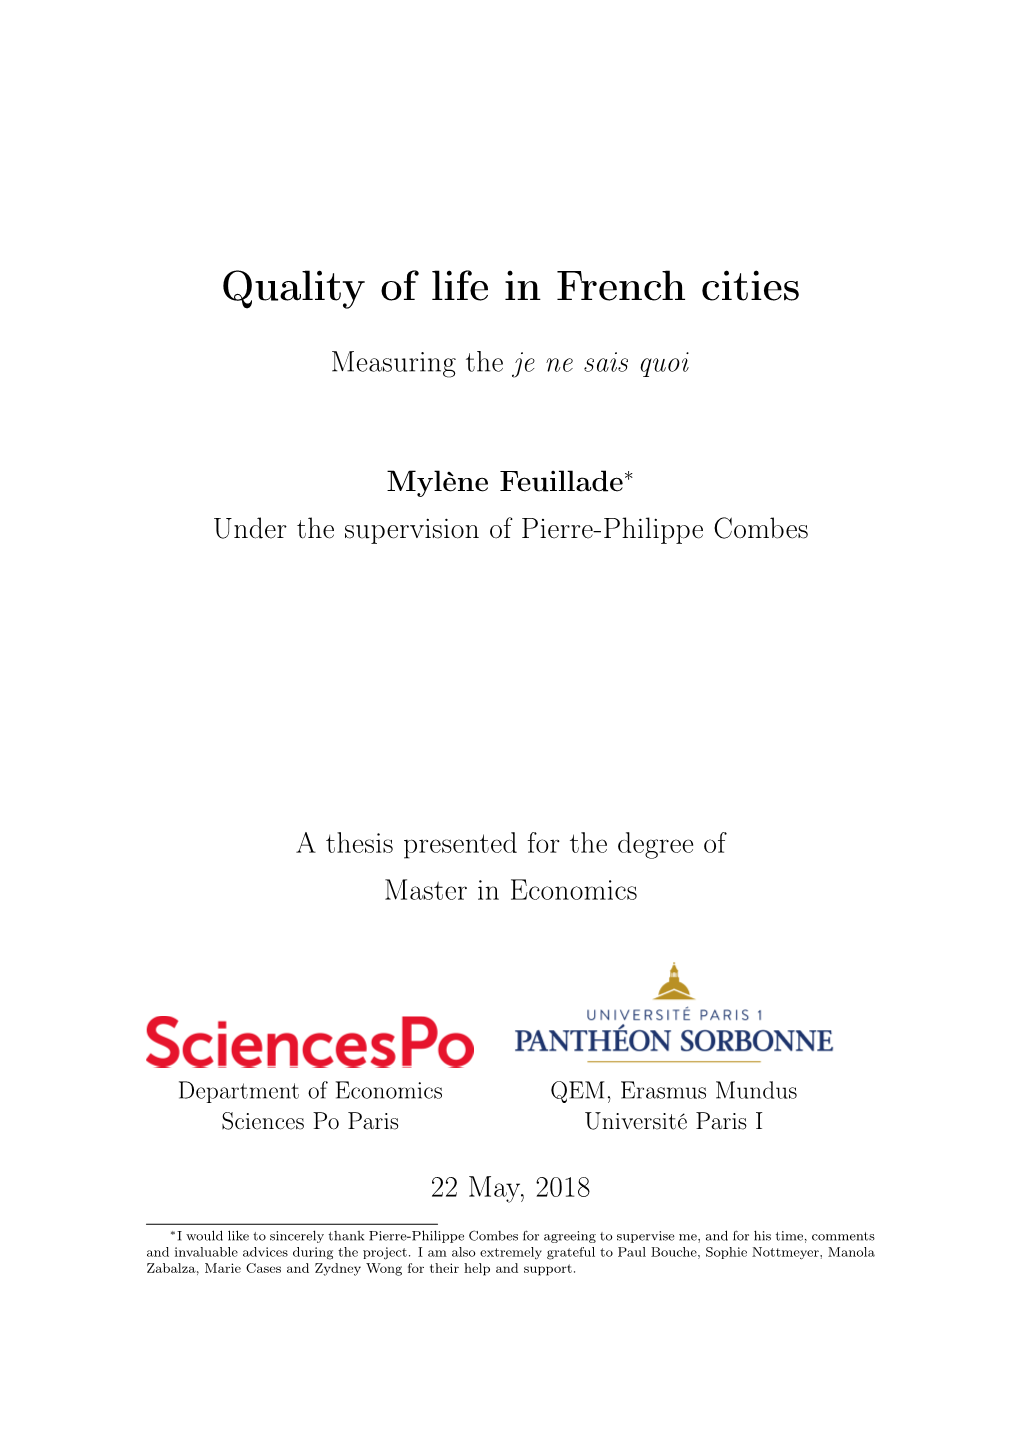 Quality of Life in French Cities